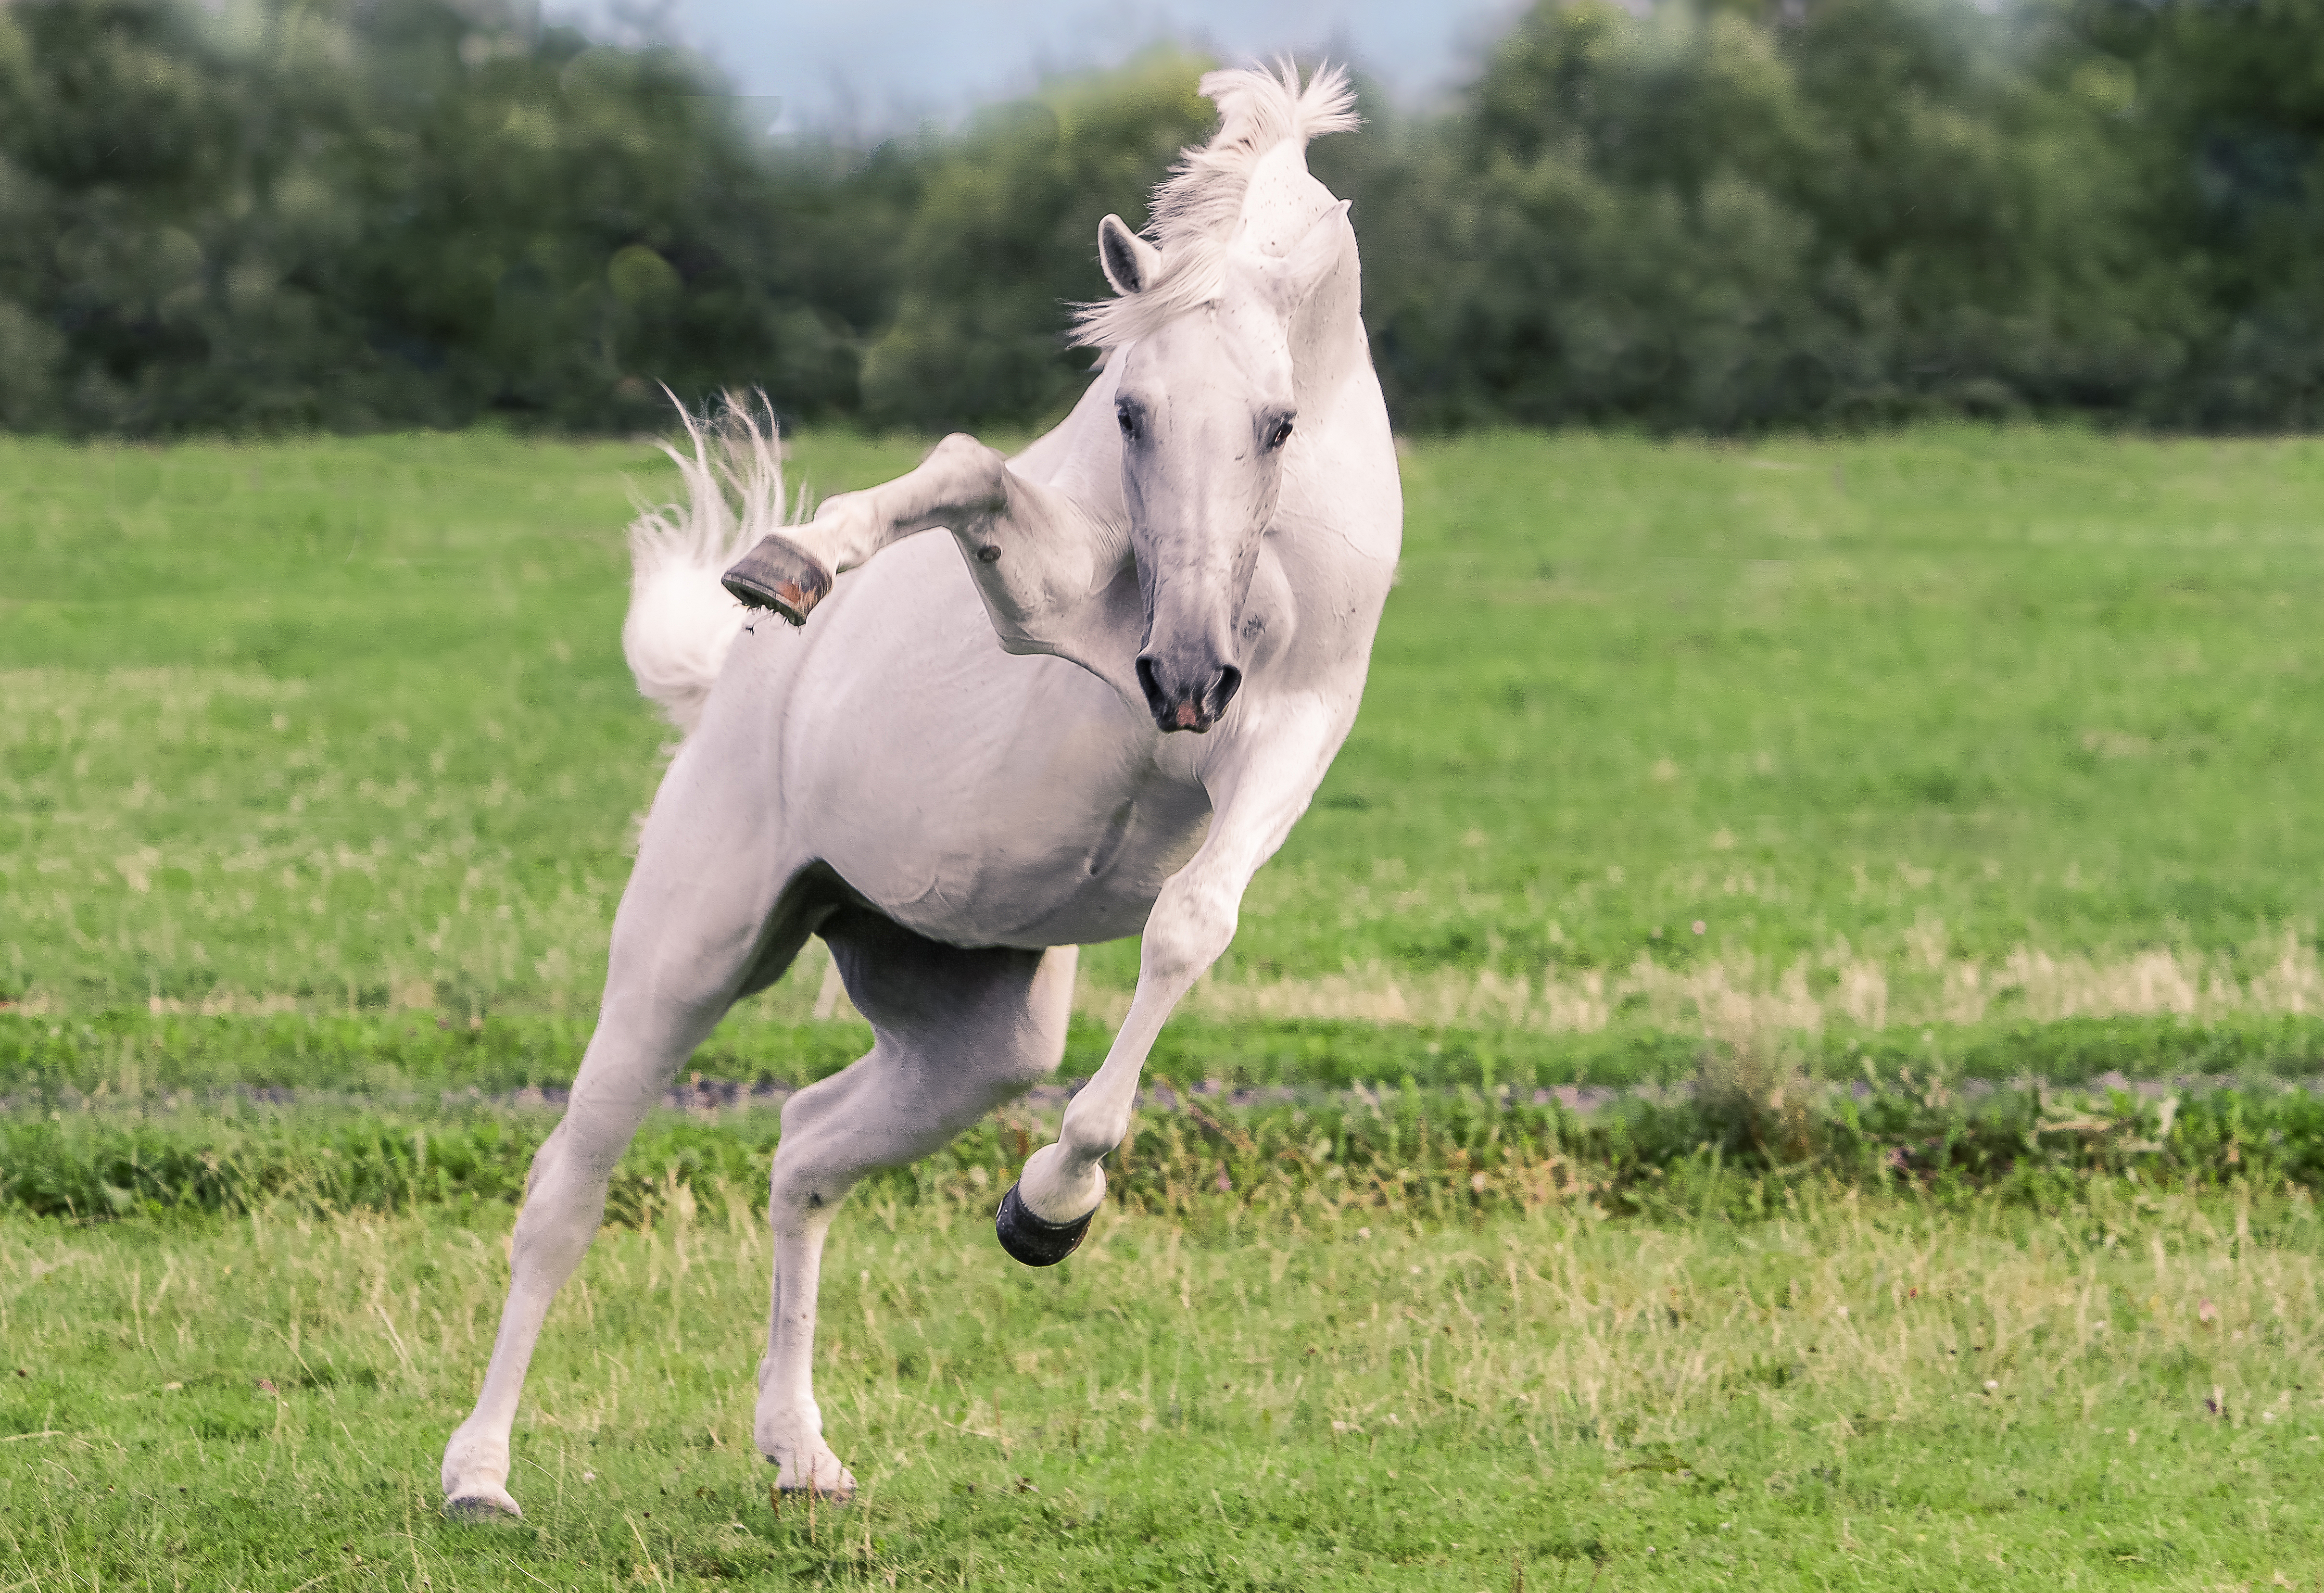 Horse Mammals Outdoors Animals Grass White Domesticated Animals Jumping 4832x3312